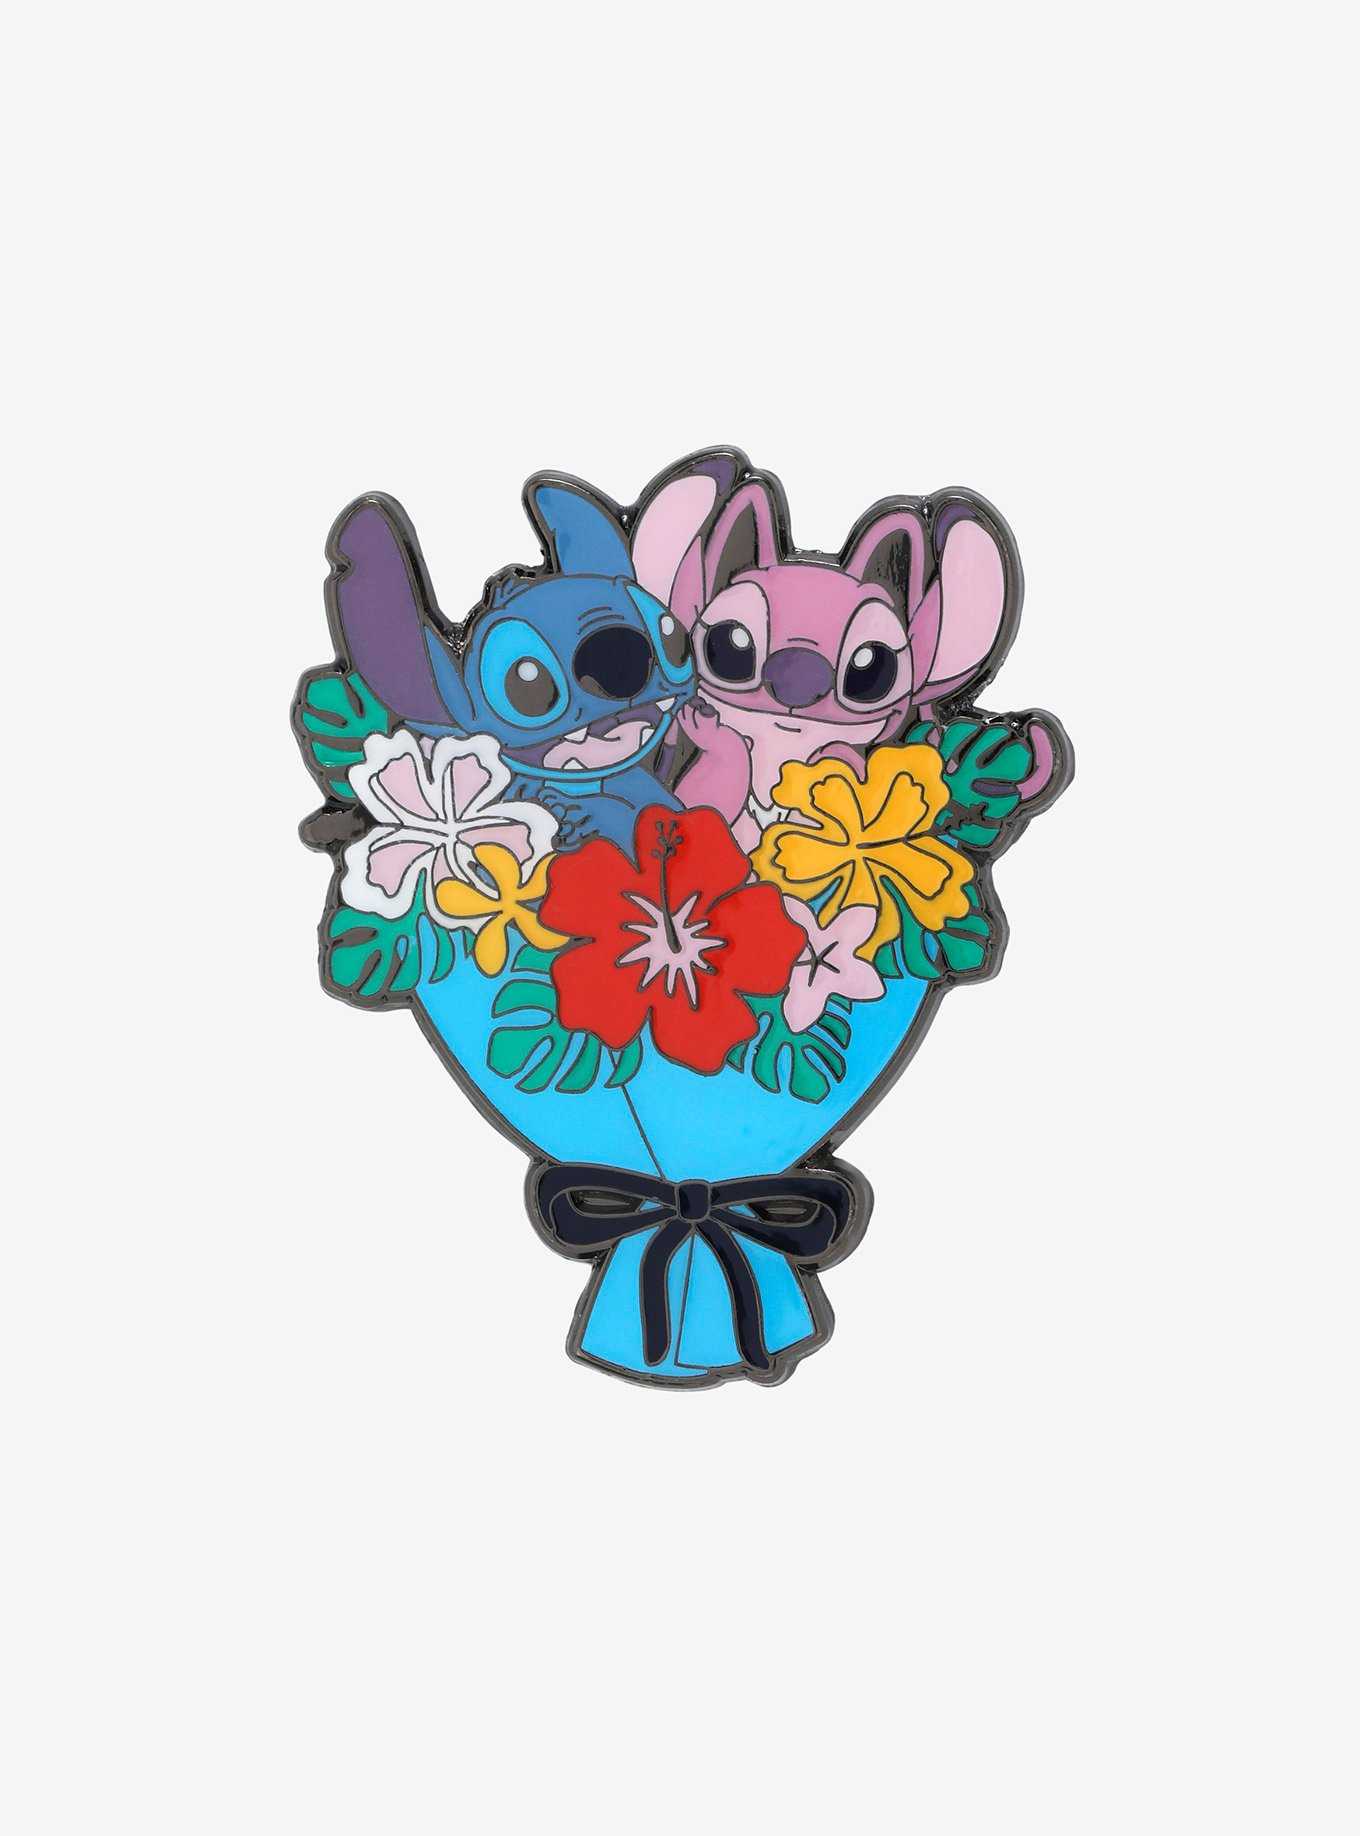 Iron On Patch Disney Inspired Fan Art Stitch from Lilo and Stitch Reading  to Ducks